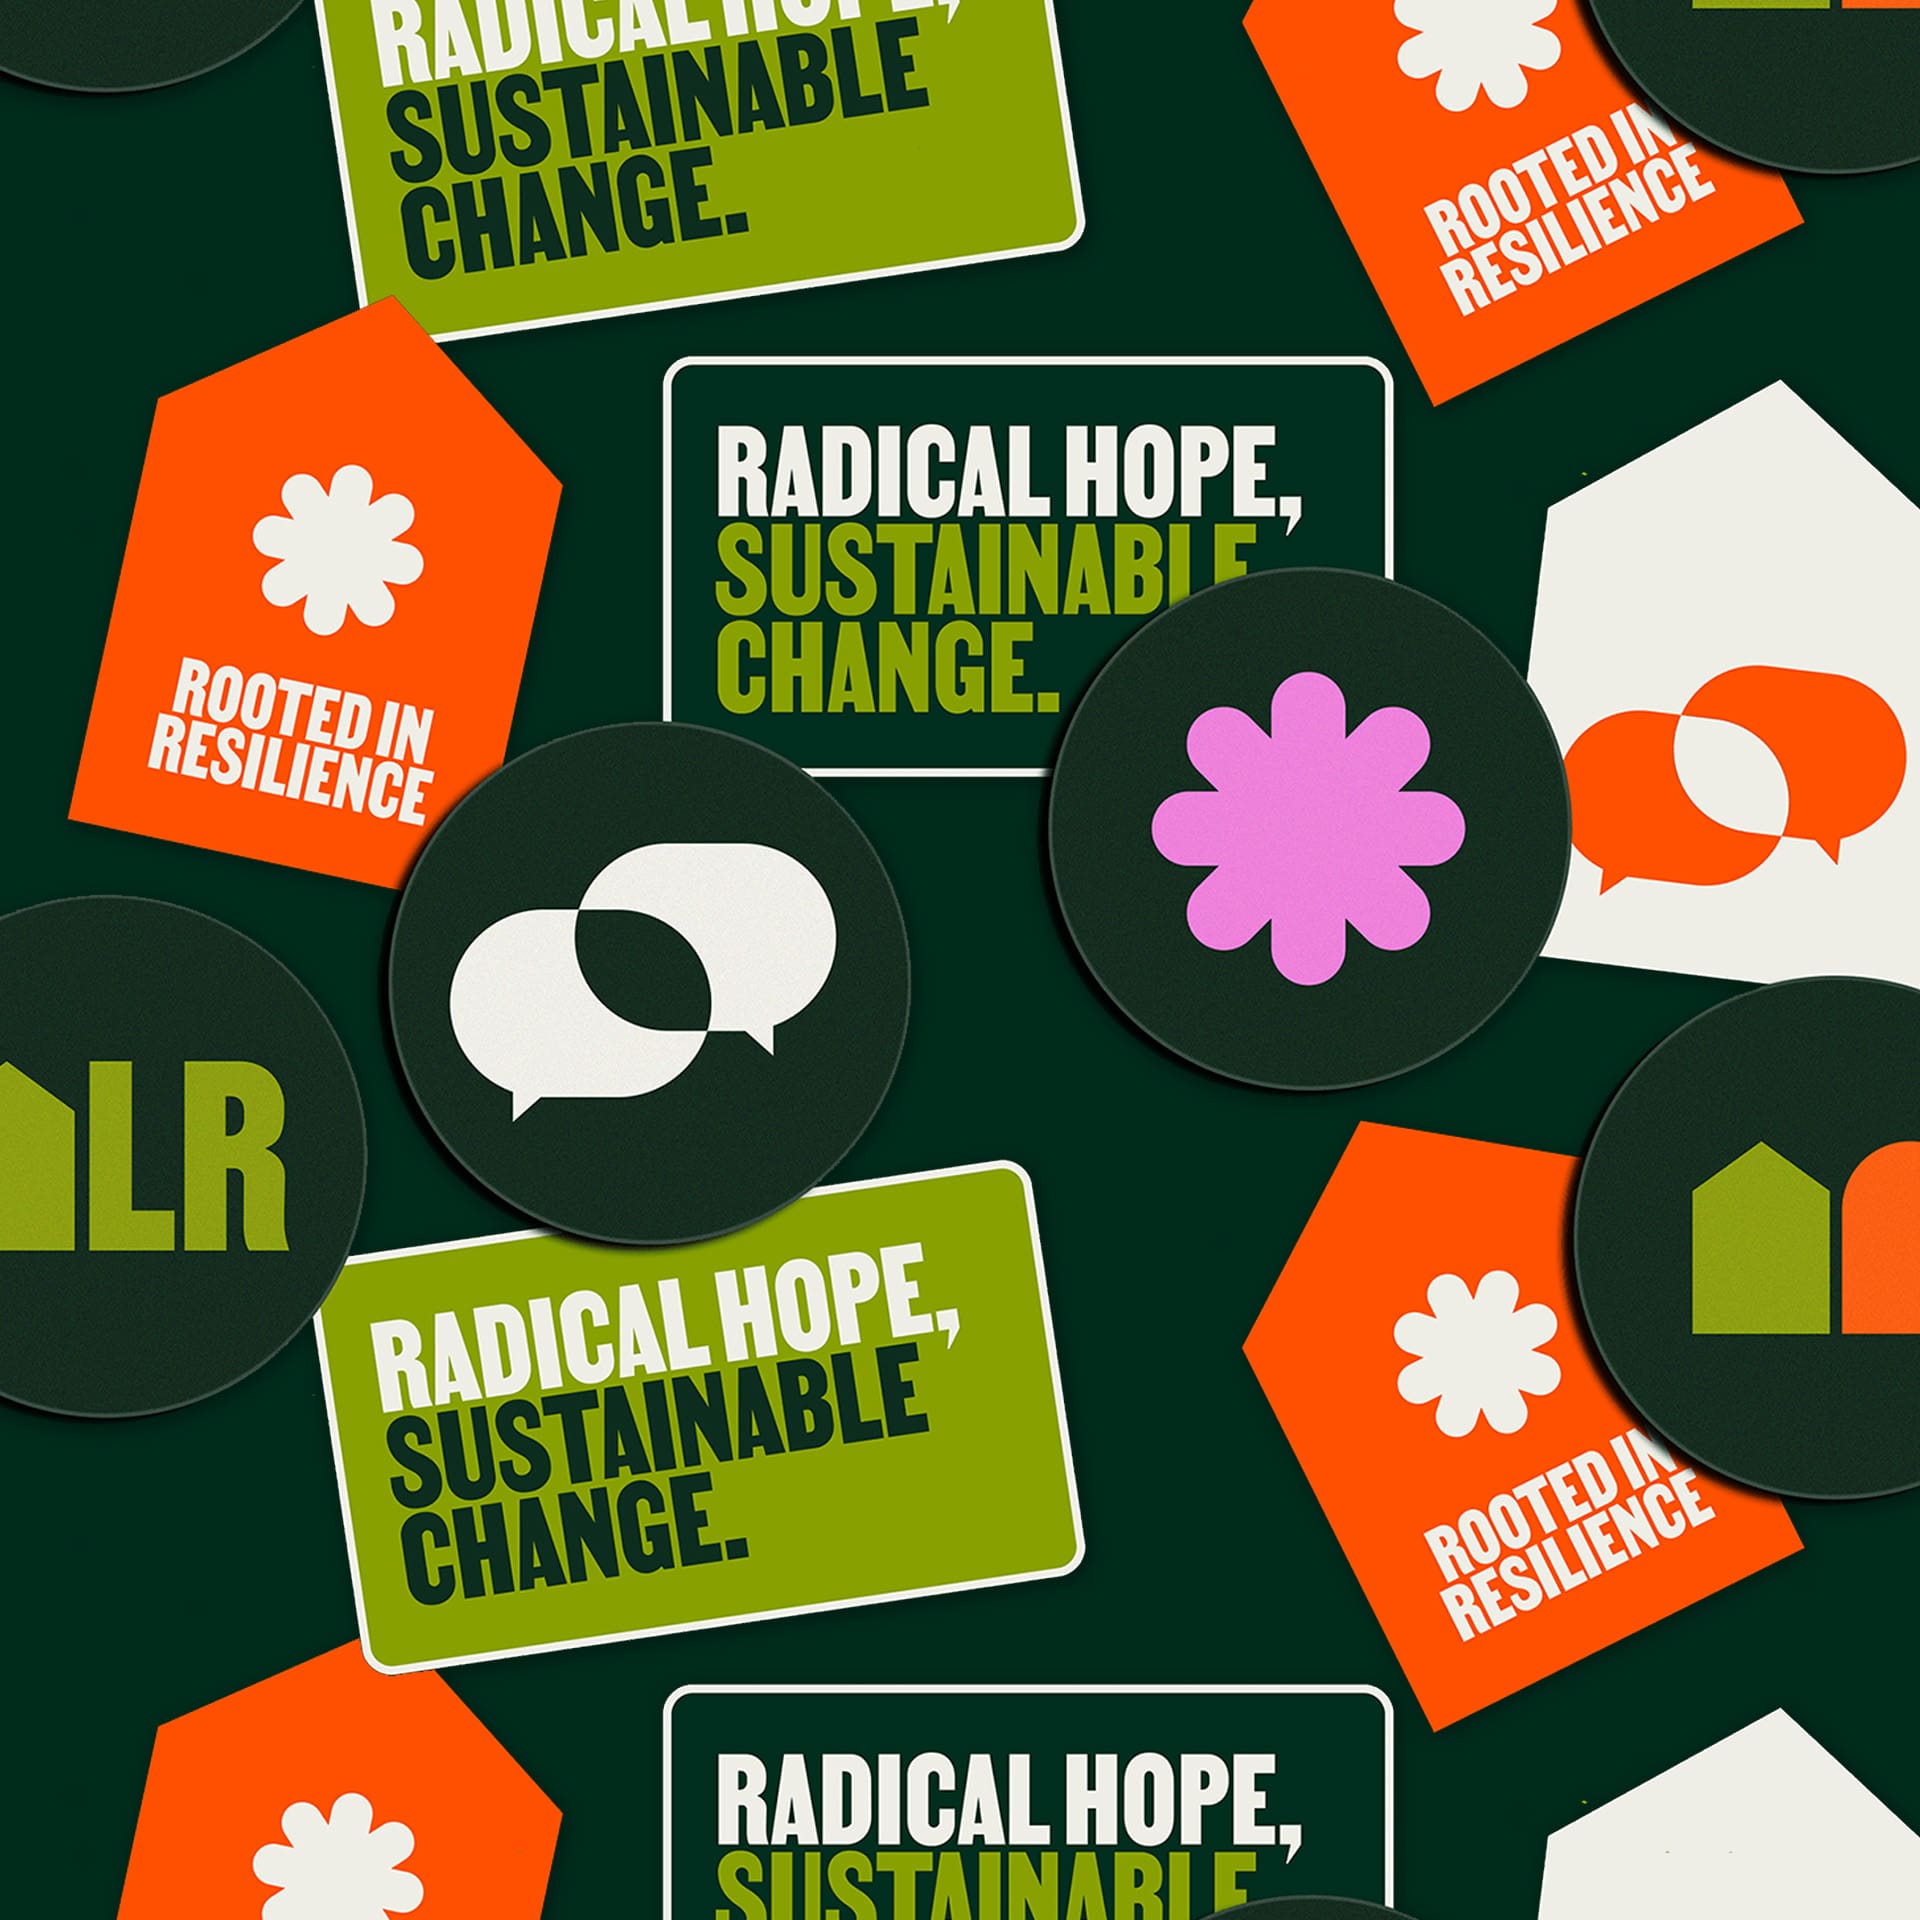 Stickers against a dark green background with strong language and iconography for the community organization Life Remodeled. The stickers are circles, rectangles, and pentagons with a color scheme of black, white, orange, and bright green. The circles have various abstract abstract shapes. The pentagons have white text which reads "Rooted in Silence" underneath a flower symbol. The rectangles have bold text that says "Radical hope, sustainable change".